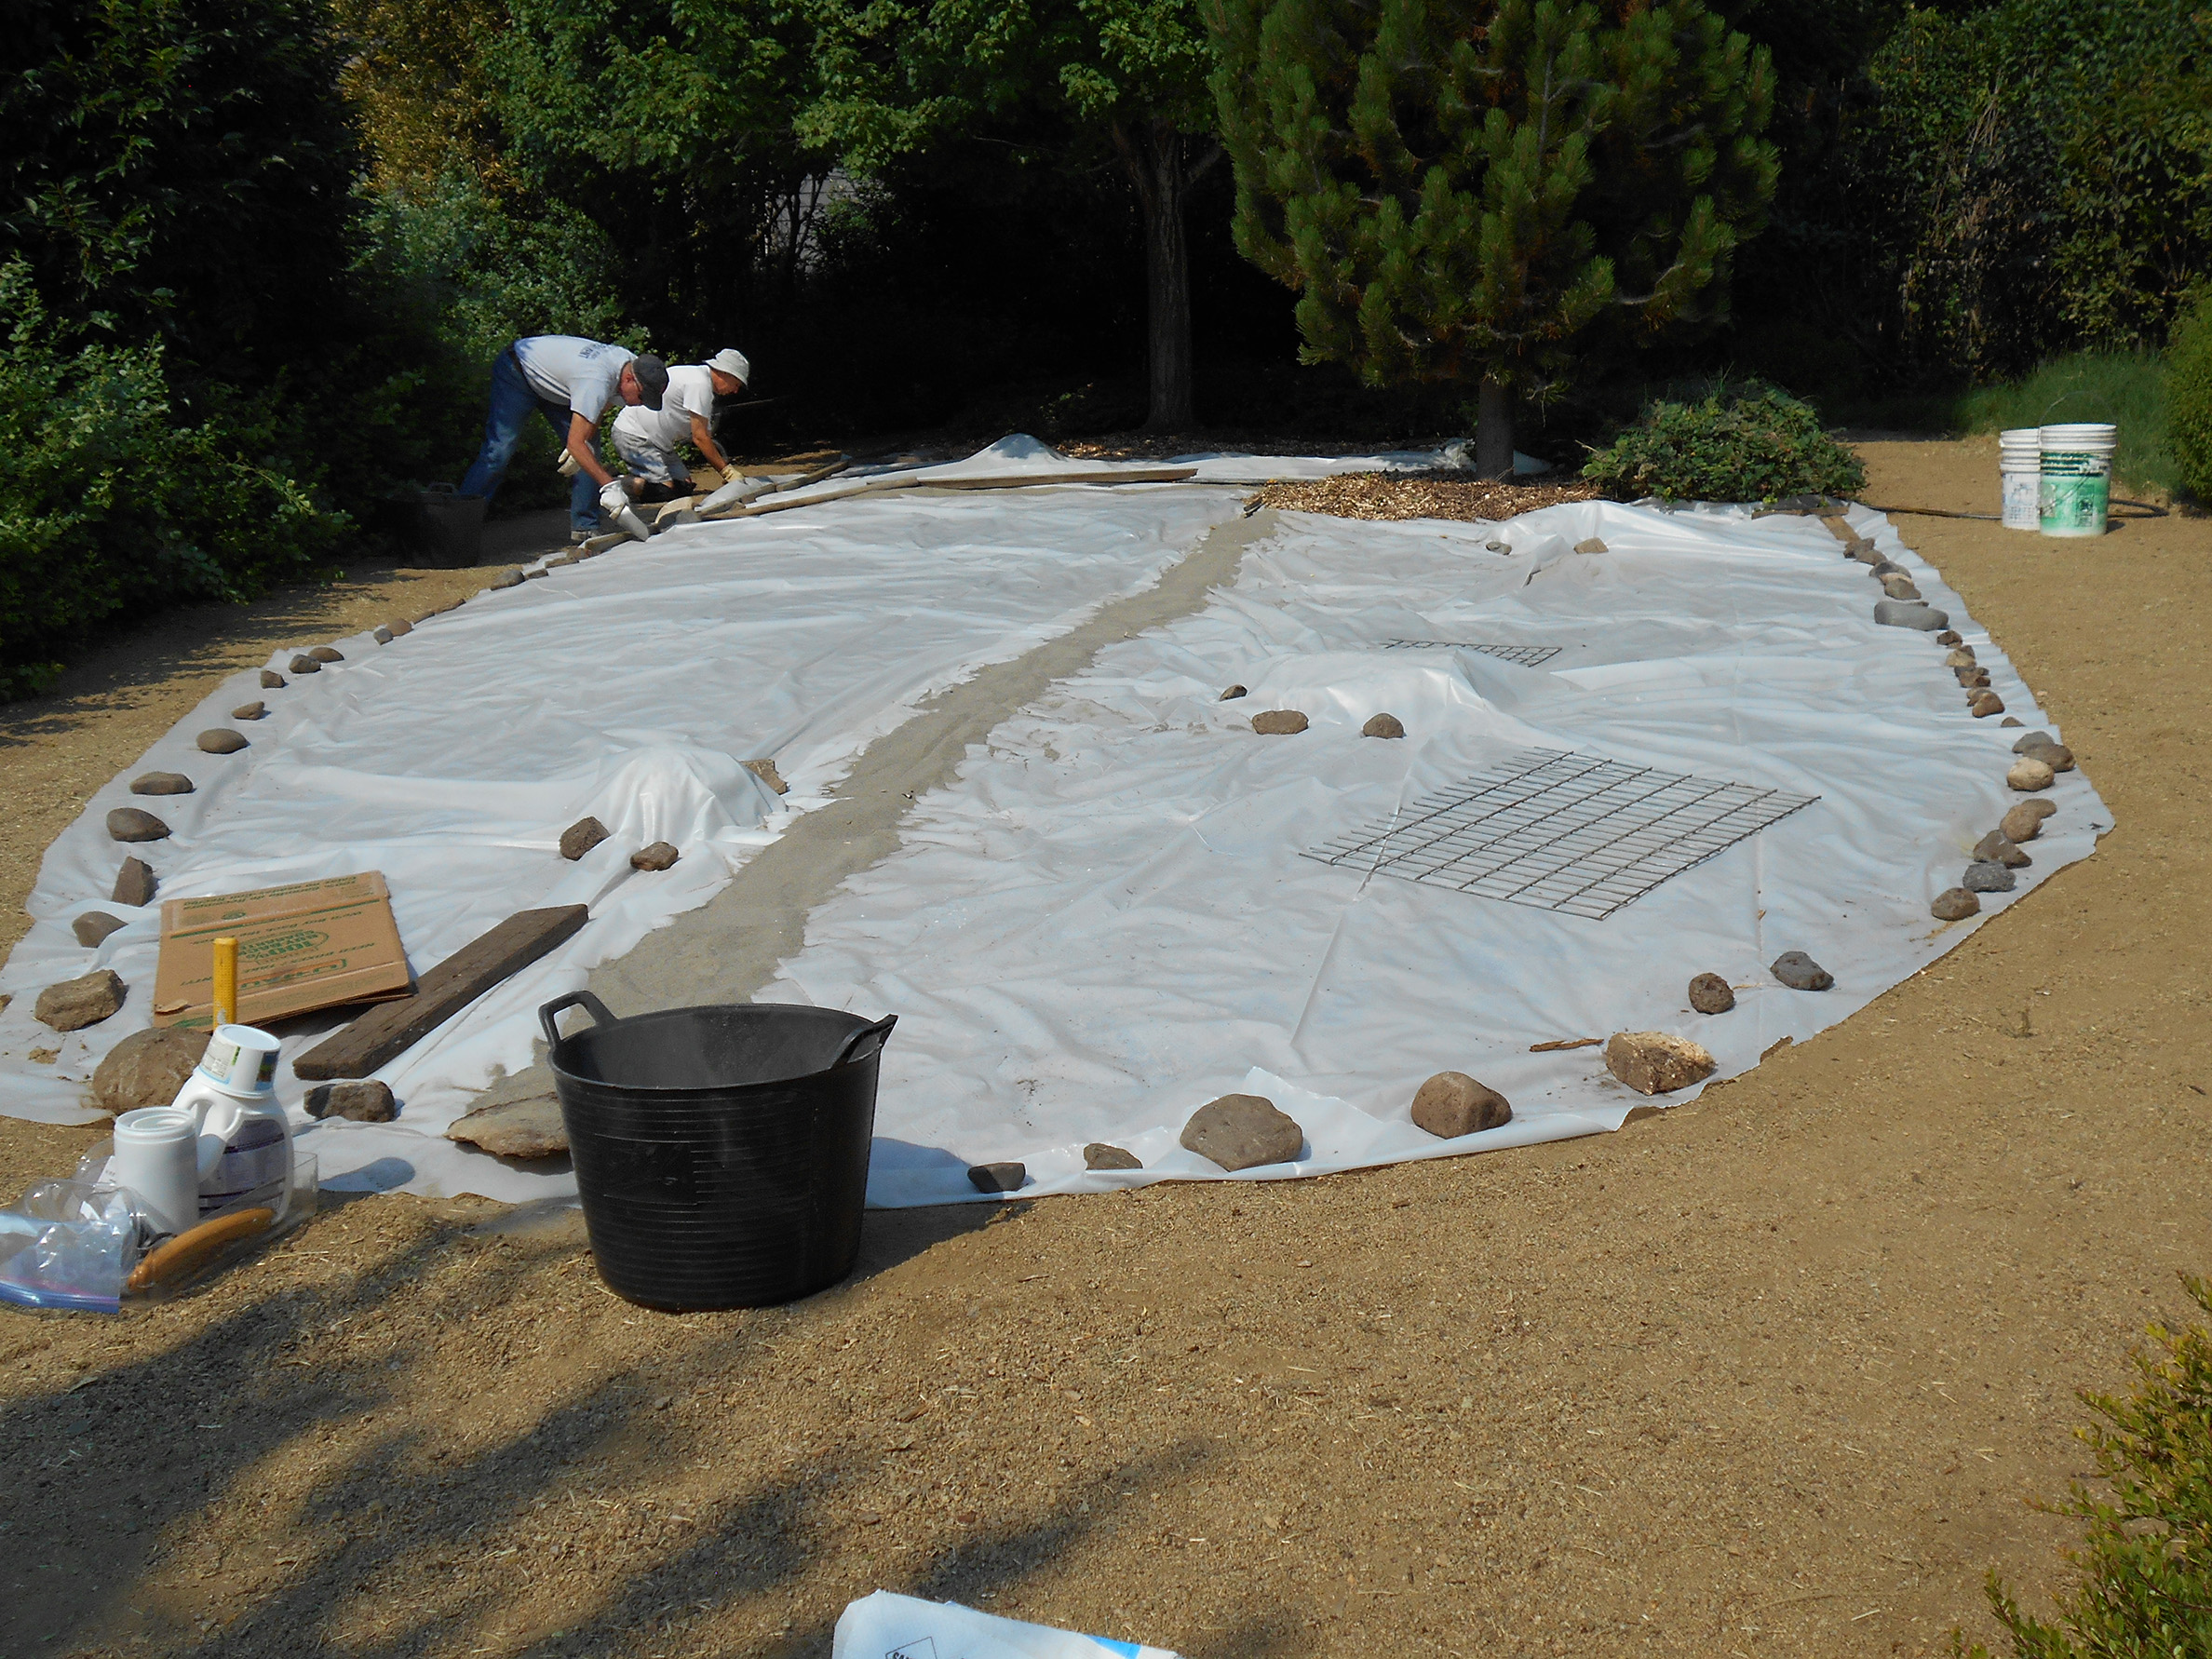 Two people work to secure the edge of a large oval of plastic sheet to hold it in place over an area of weeds. The weeds will wilt under the plastic, leaving the area clear and ready for a pollinator garden